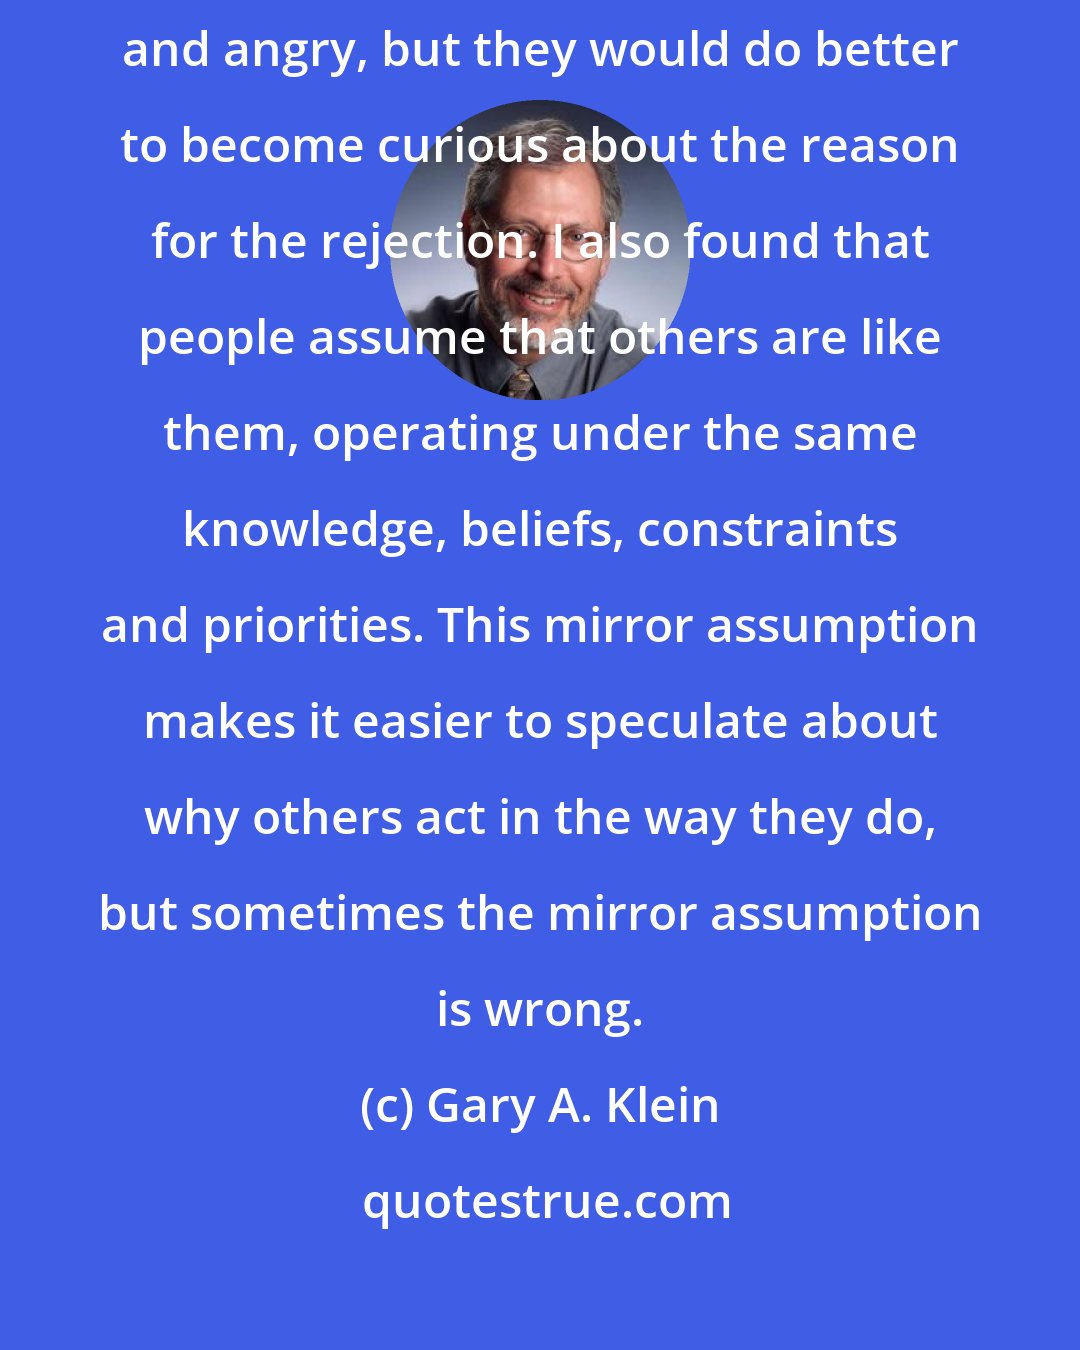 Gary A. Klein: My research suggests that when people get rebuffed they become frustrated and angry, but they would do better to become curious about the reason for the rejection. I also found that people assume that others are like them, operating under the same knowledge, beliefs, constraints and priorities. This mirror assumption makes it easier to speculate about why others act in the way they do, but sometimes the mirror assumption is wrong.